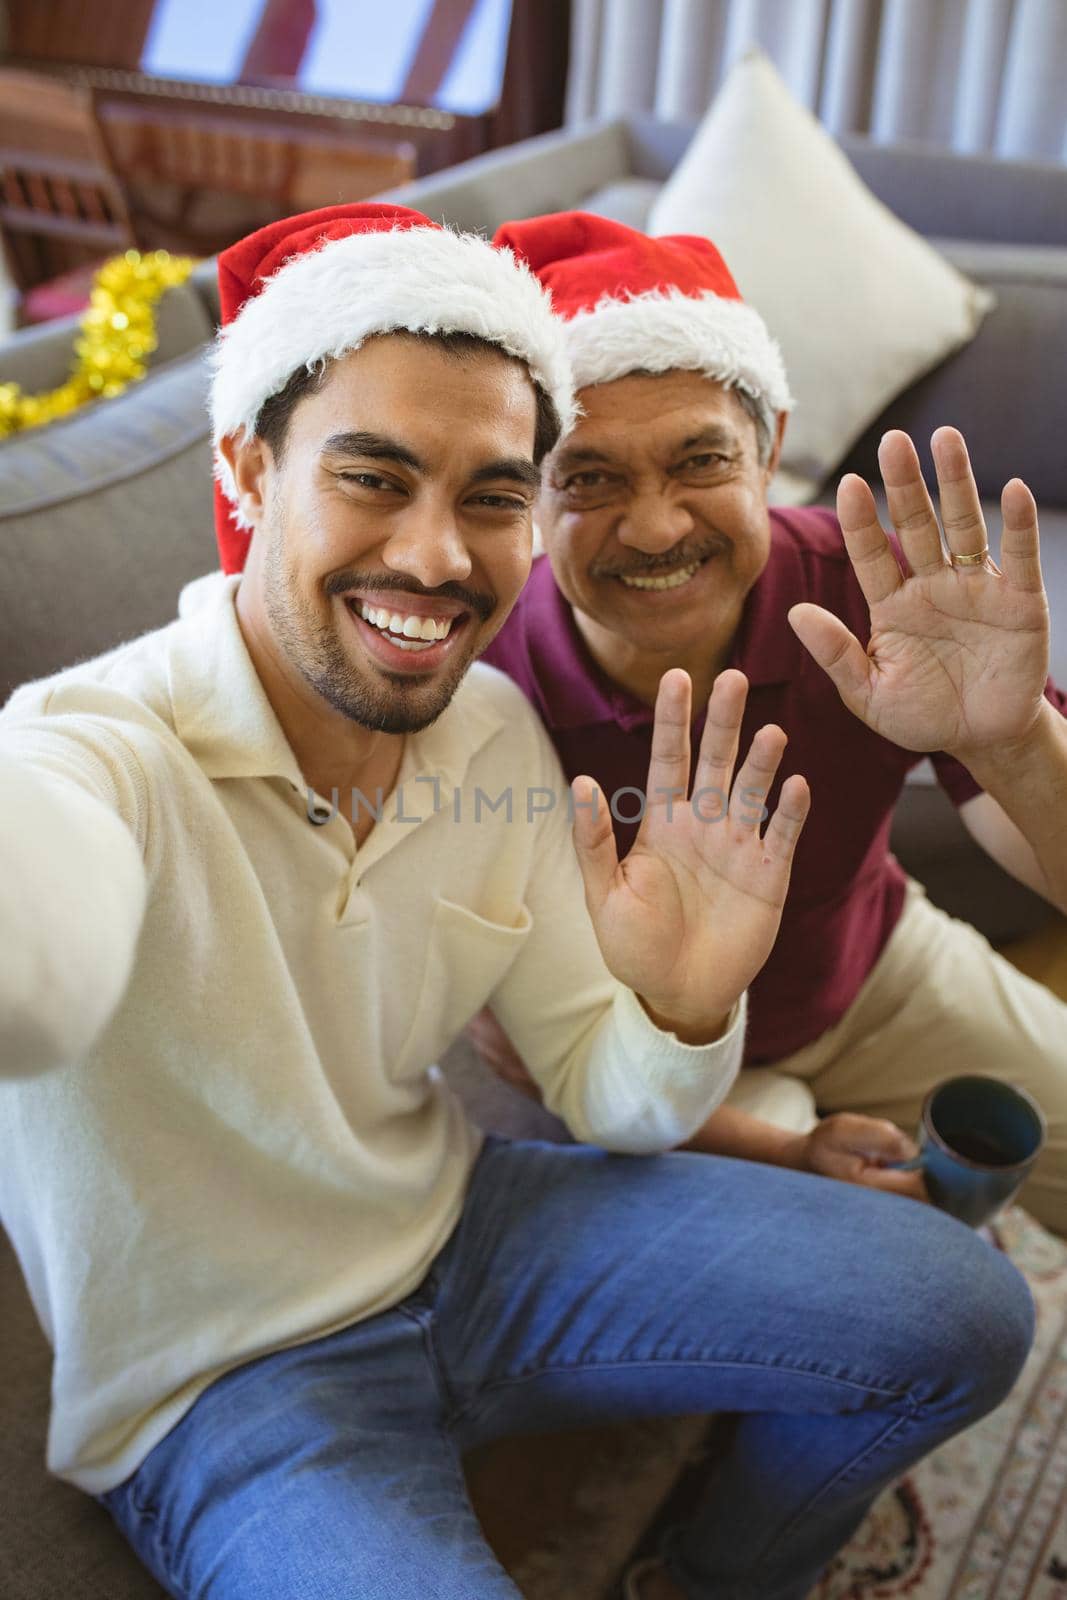 Portrait of happy biracial adult son and senior father in santa hats making christmas video call by Wavebreakmedia